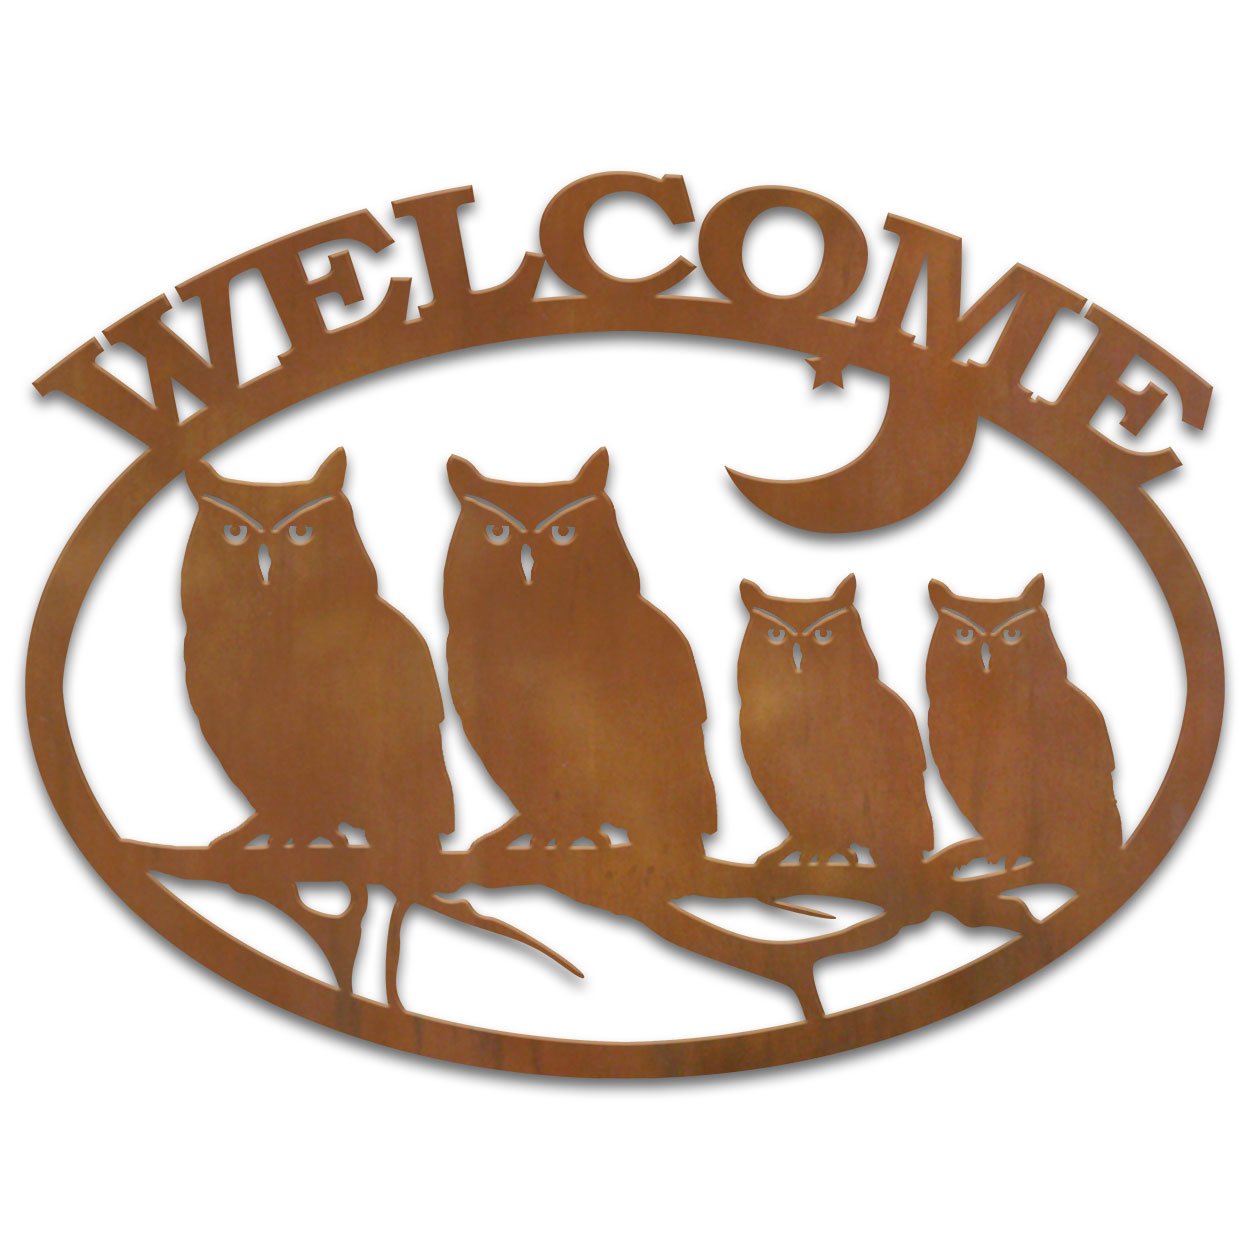 600121 - Four Owls Metal Welcome Sign Wall Art